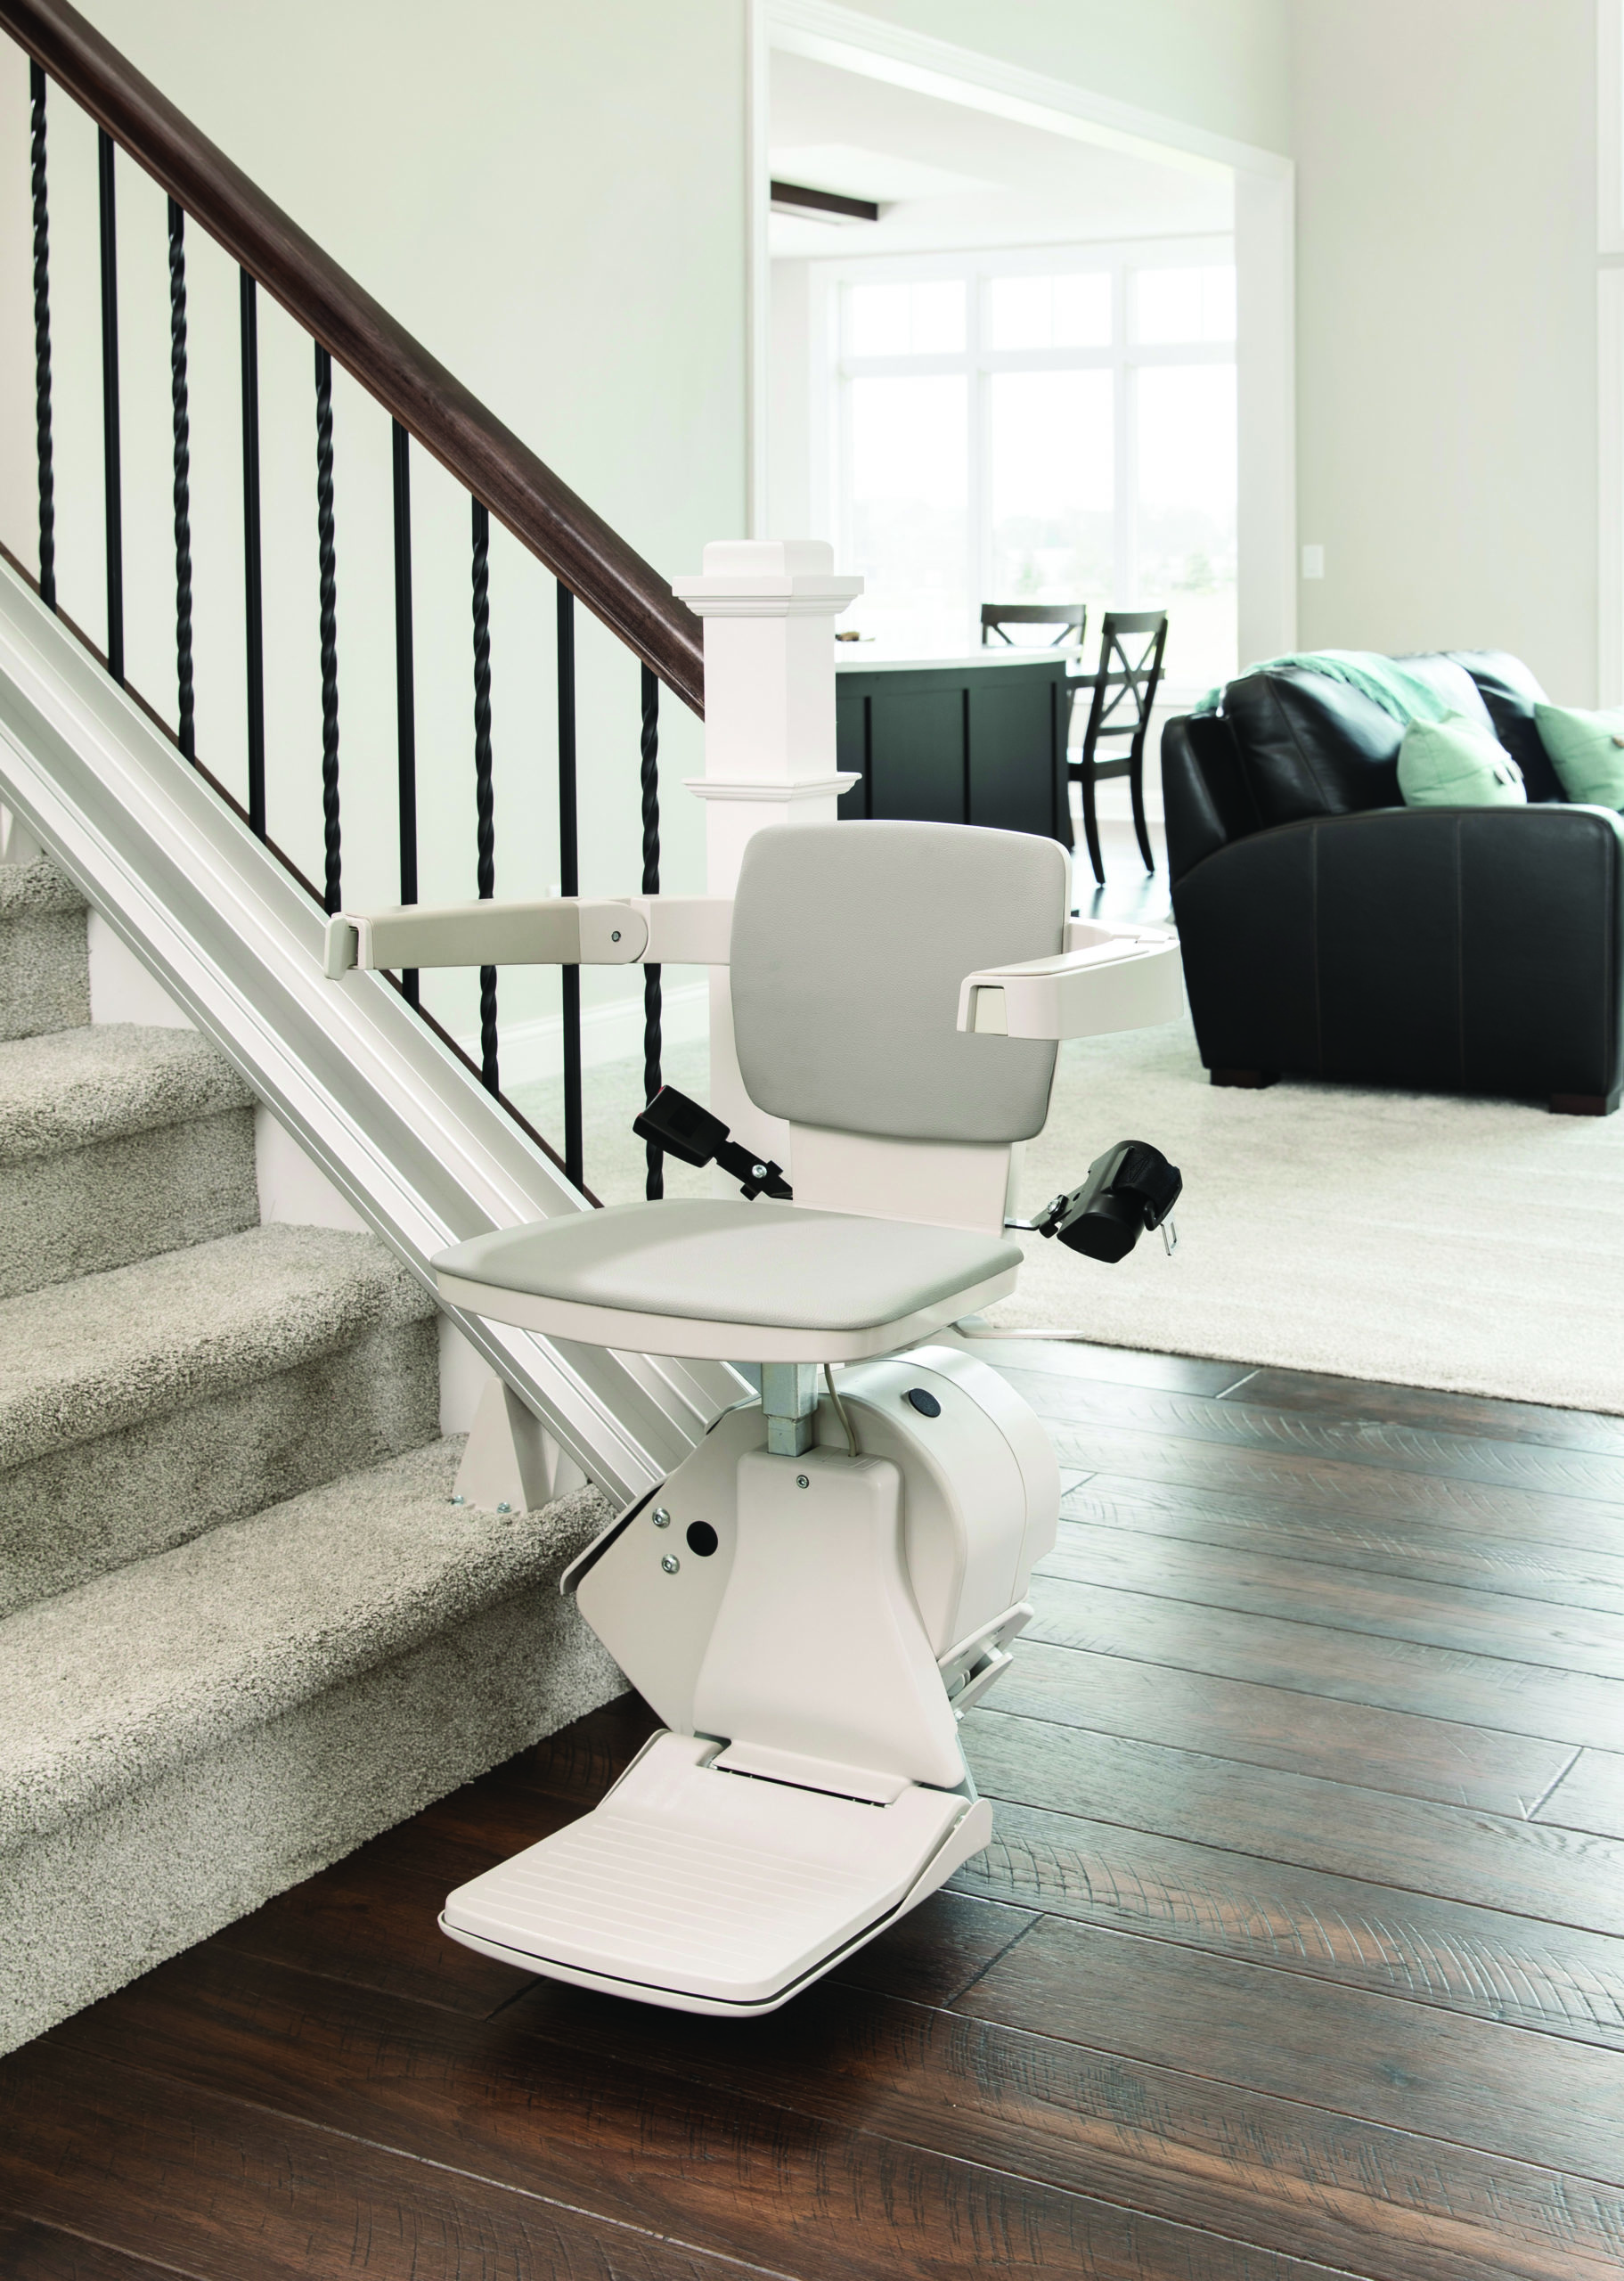 Home Medical Stair Lifts | Mission Health + Home in Rochester, NY